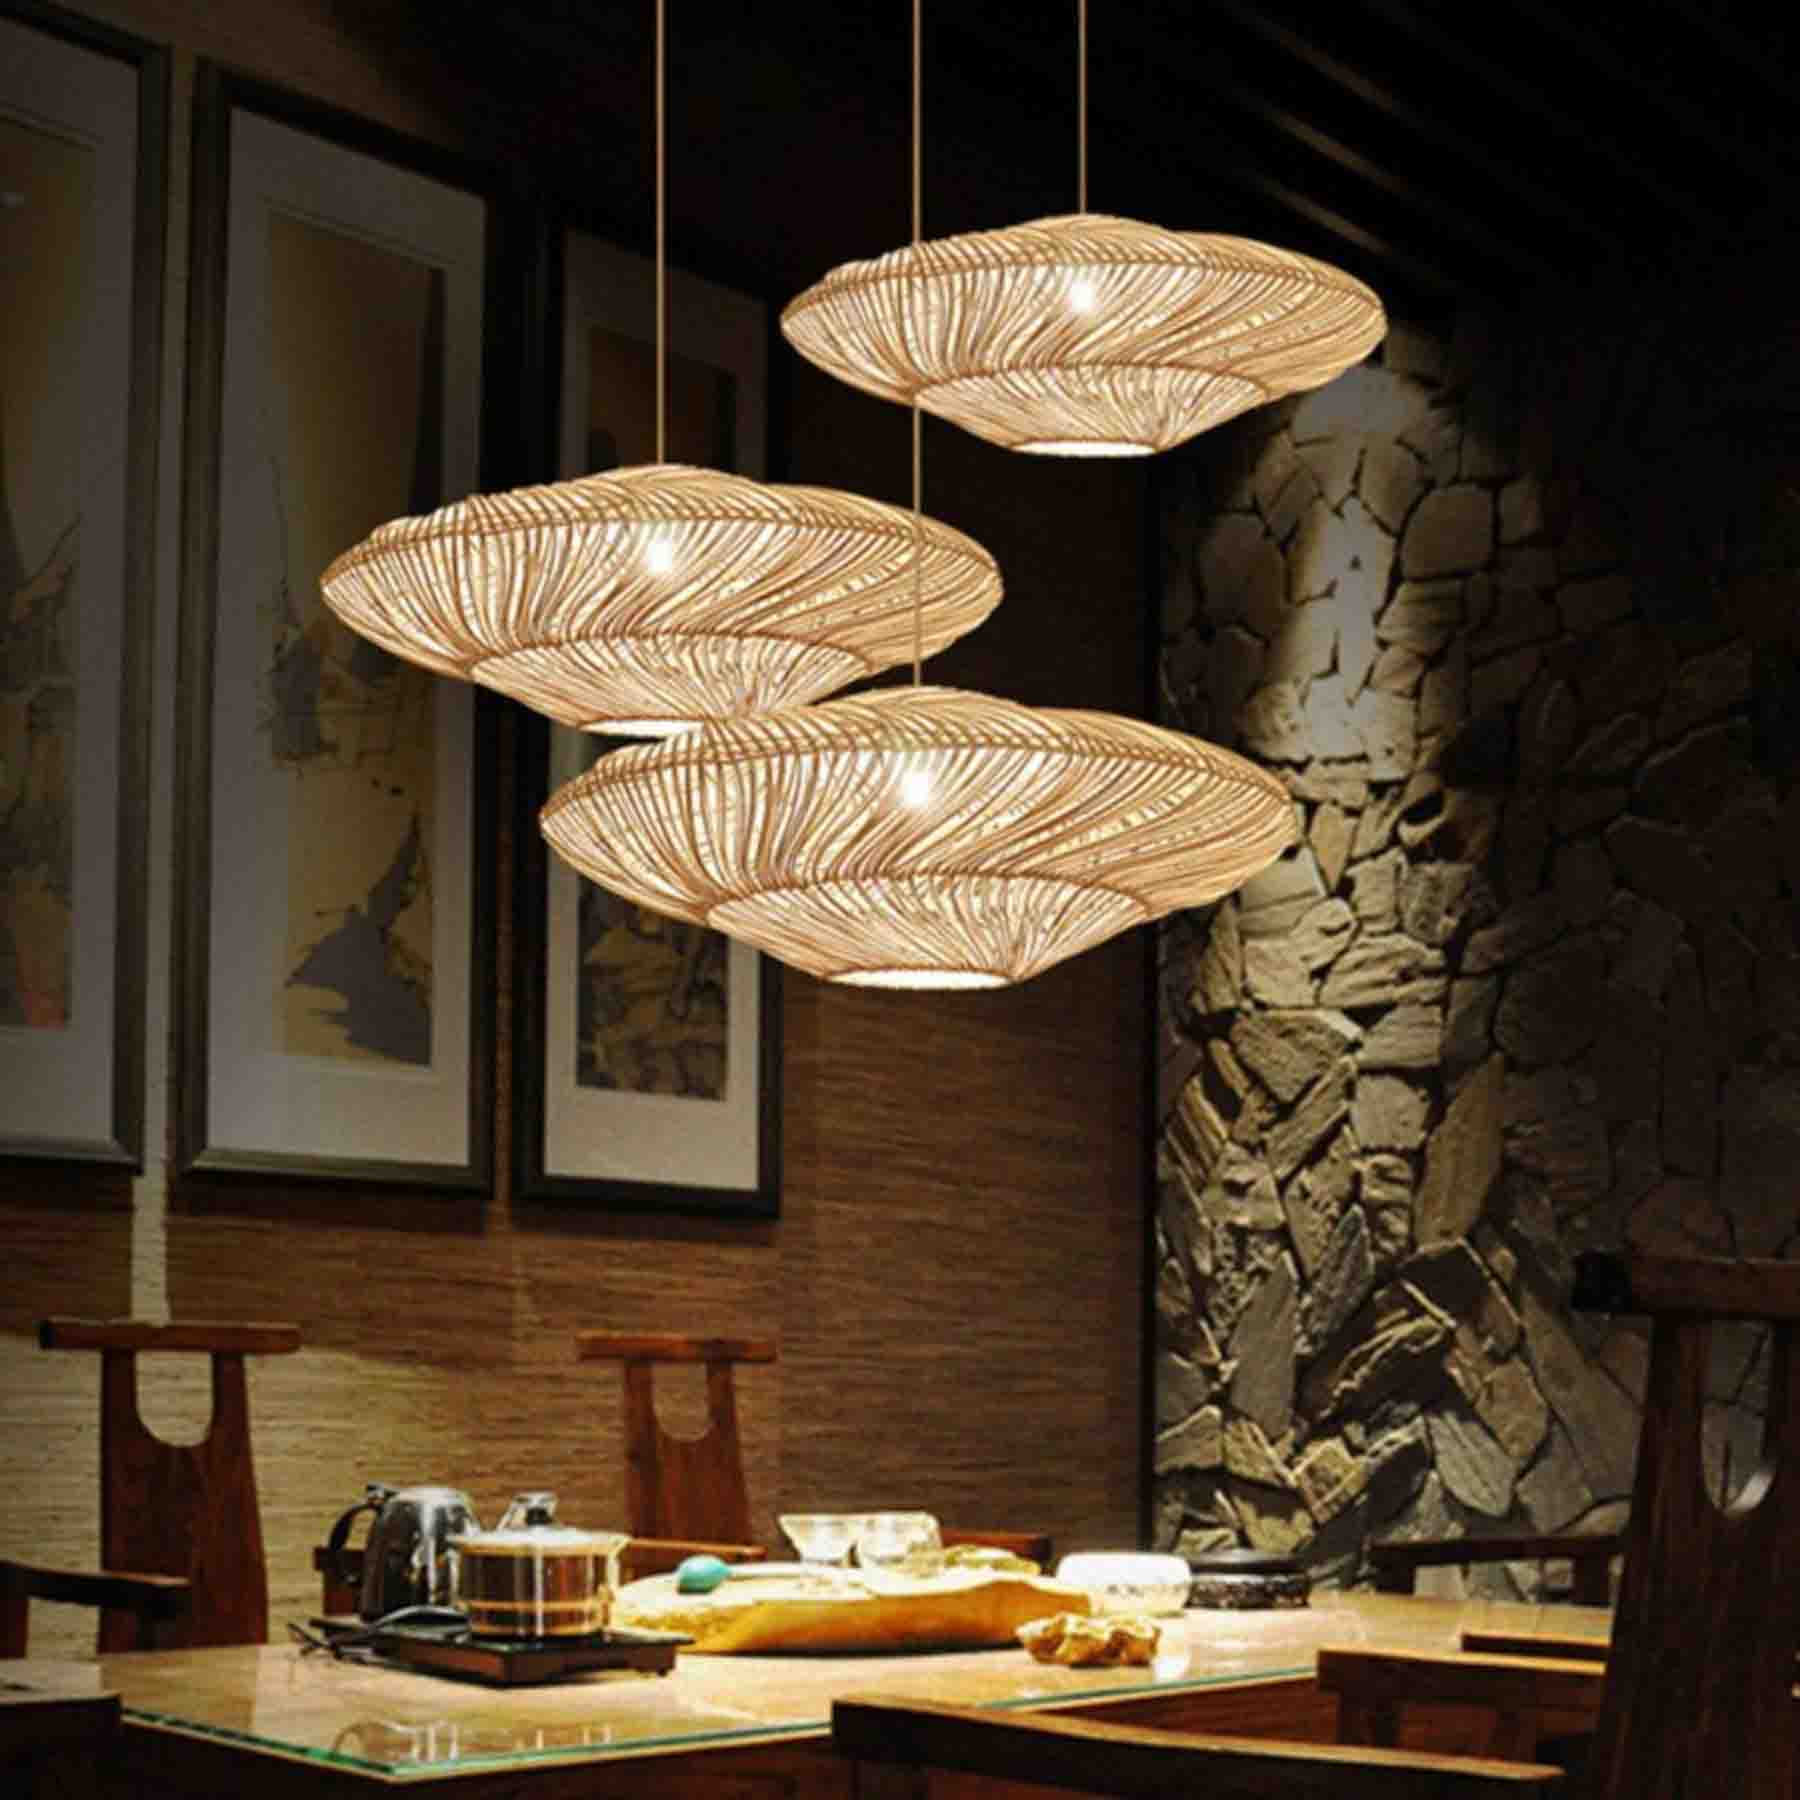 the gentle warm and soothing light emitted by rattan pendant lights enhances the visual comfort